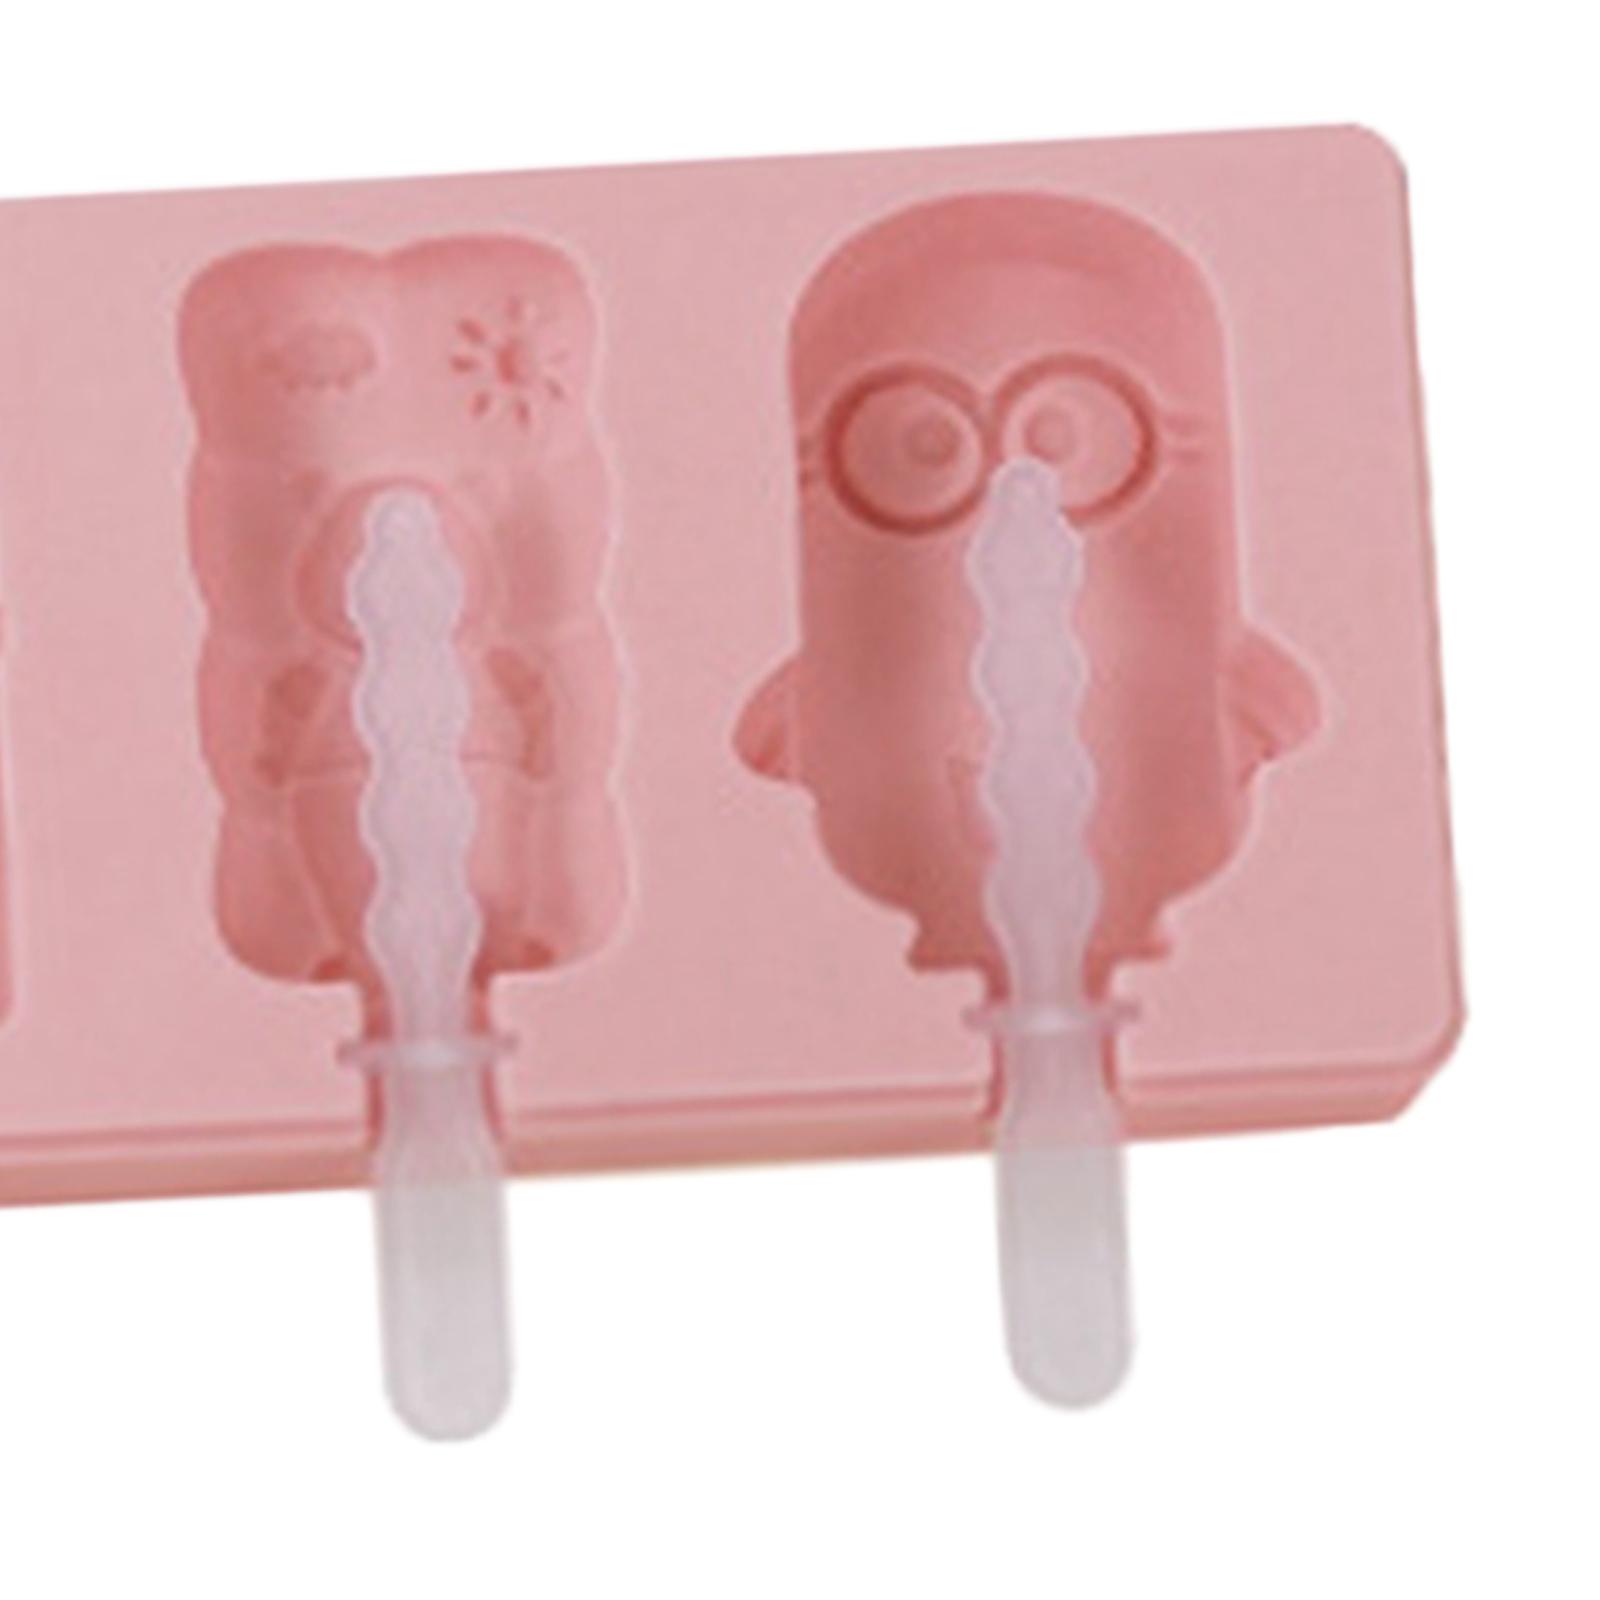 Popsicle maker for Release Cartoon Removable Cute Image Ice Making style F